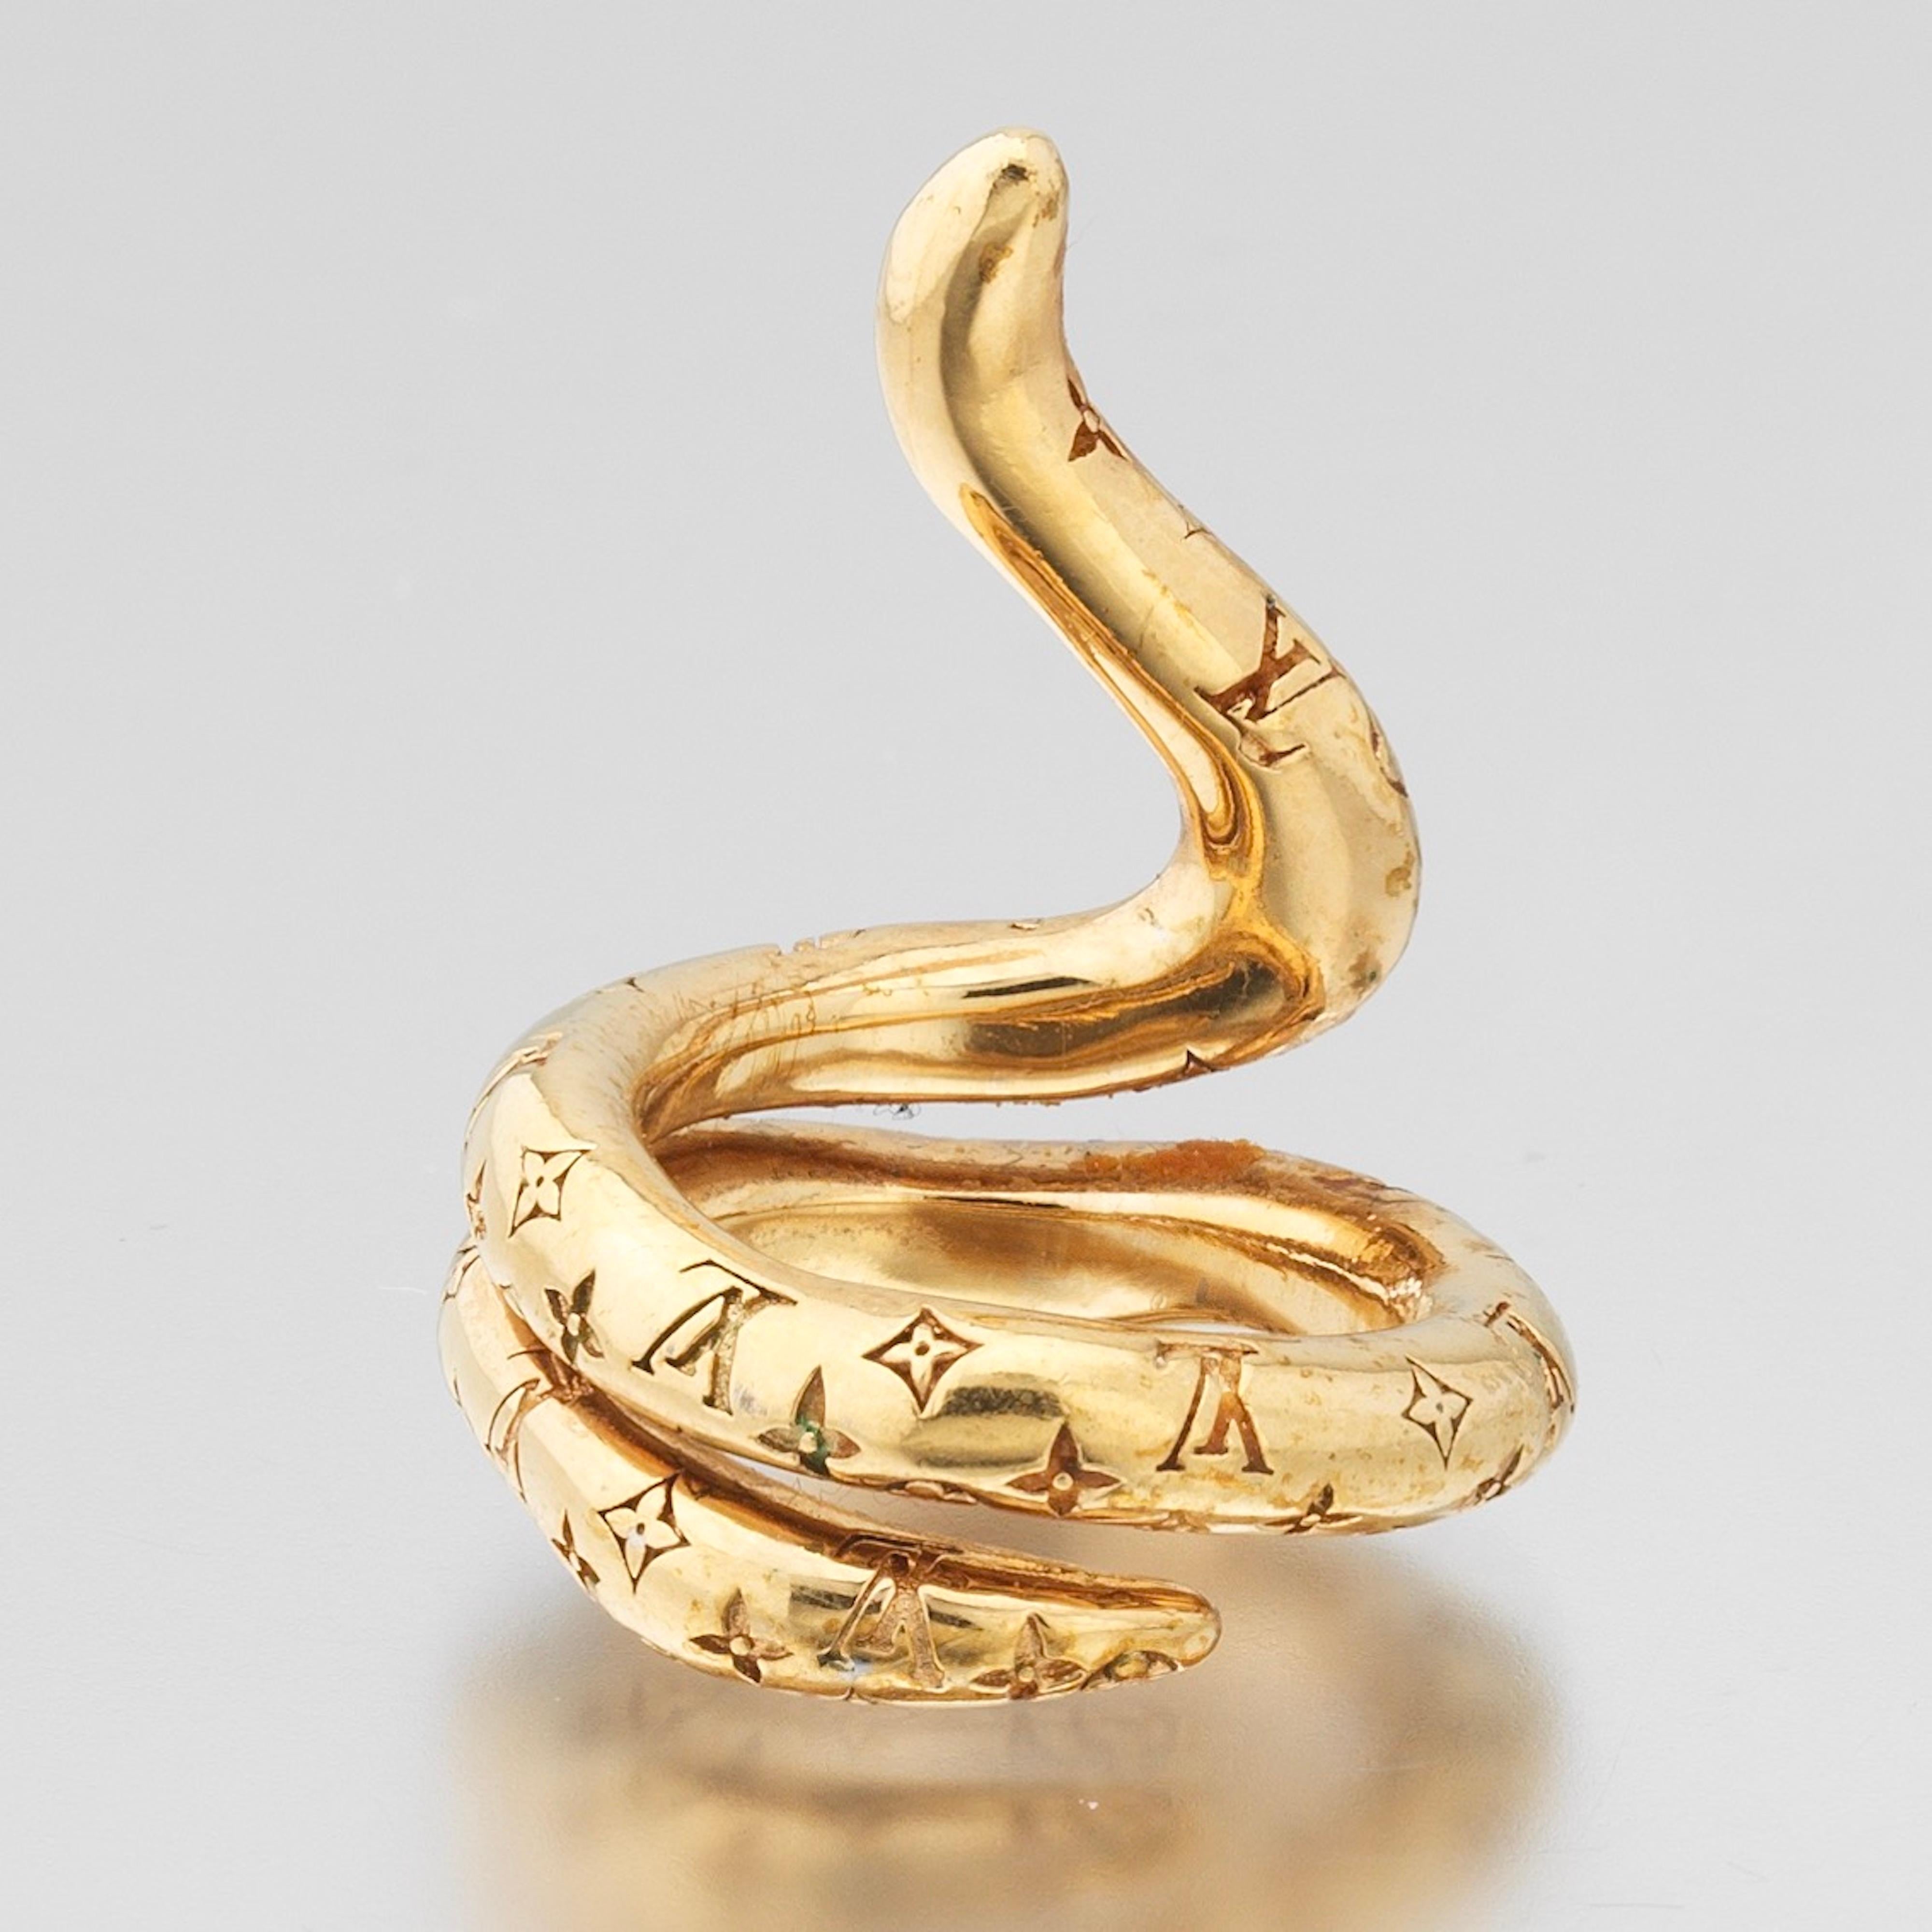 Louis Vuitton Monogram Snake Ring. Gold tone metal with LV monogram motif, made in Italy, marked on the inside of the ring.
Ring size 4-4.5
